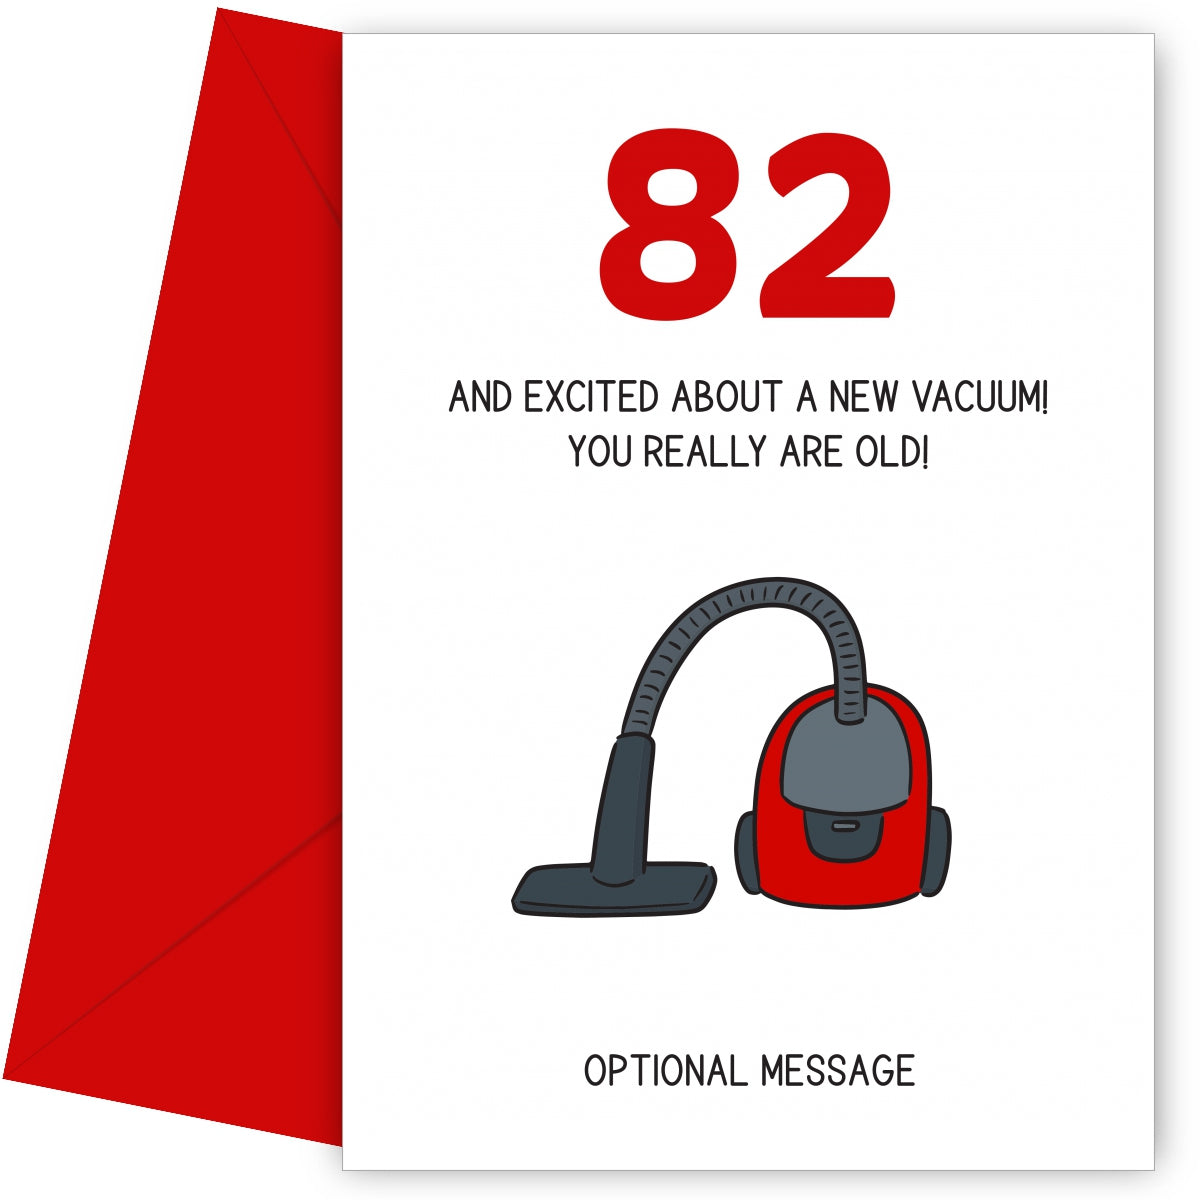 Happy 82nd Birthday Card - Excited About a New Vacuum!